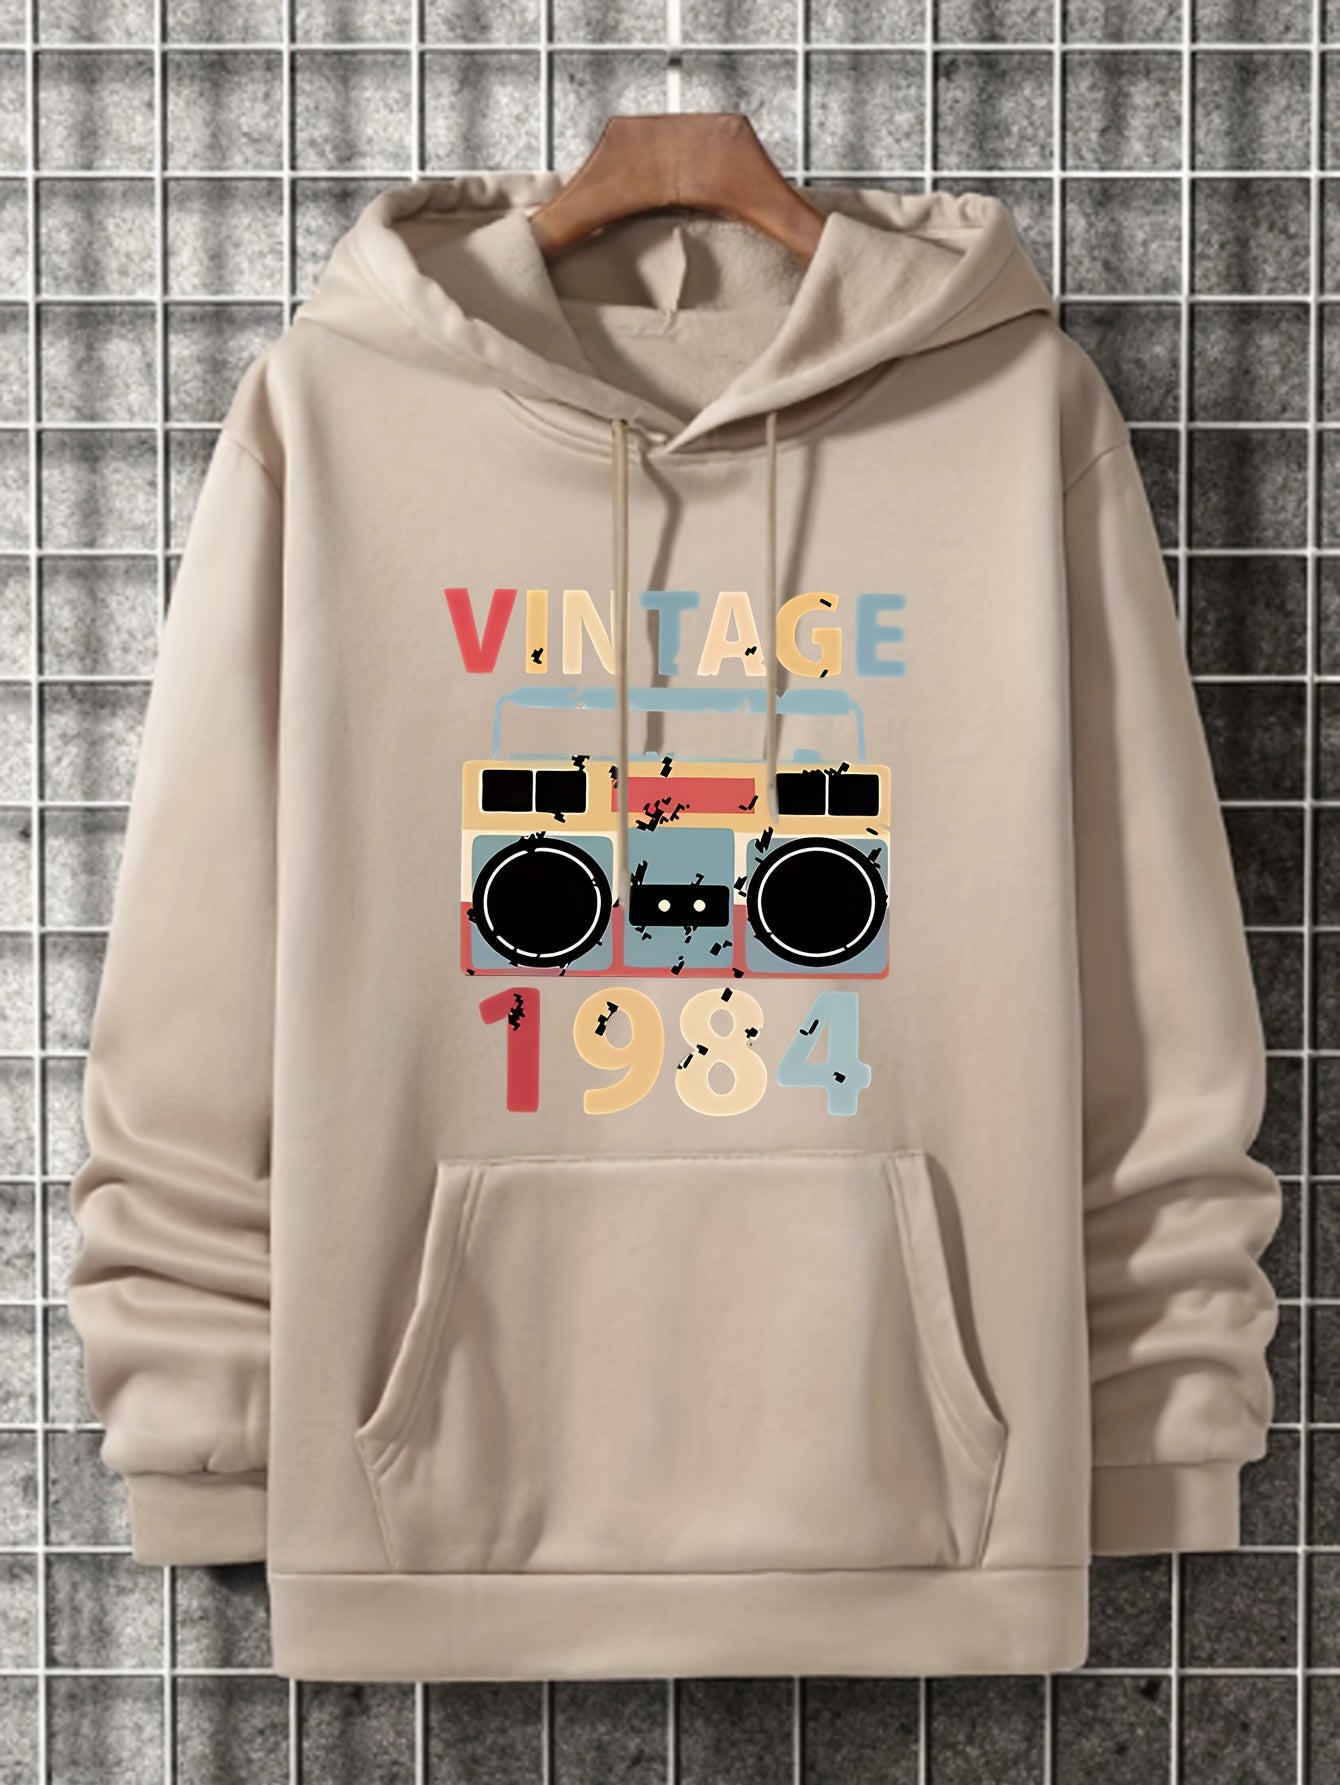 Hoodies For Men, 'Vintage' Retro Stereo Print Hoodie, Men's Casual Pullover Hooded Sweatshirt With Kangaroo Pocket For Spring Fall, As Gifts